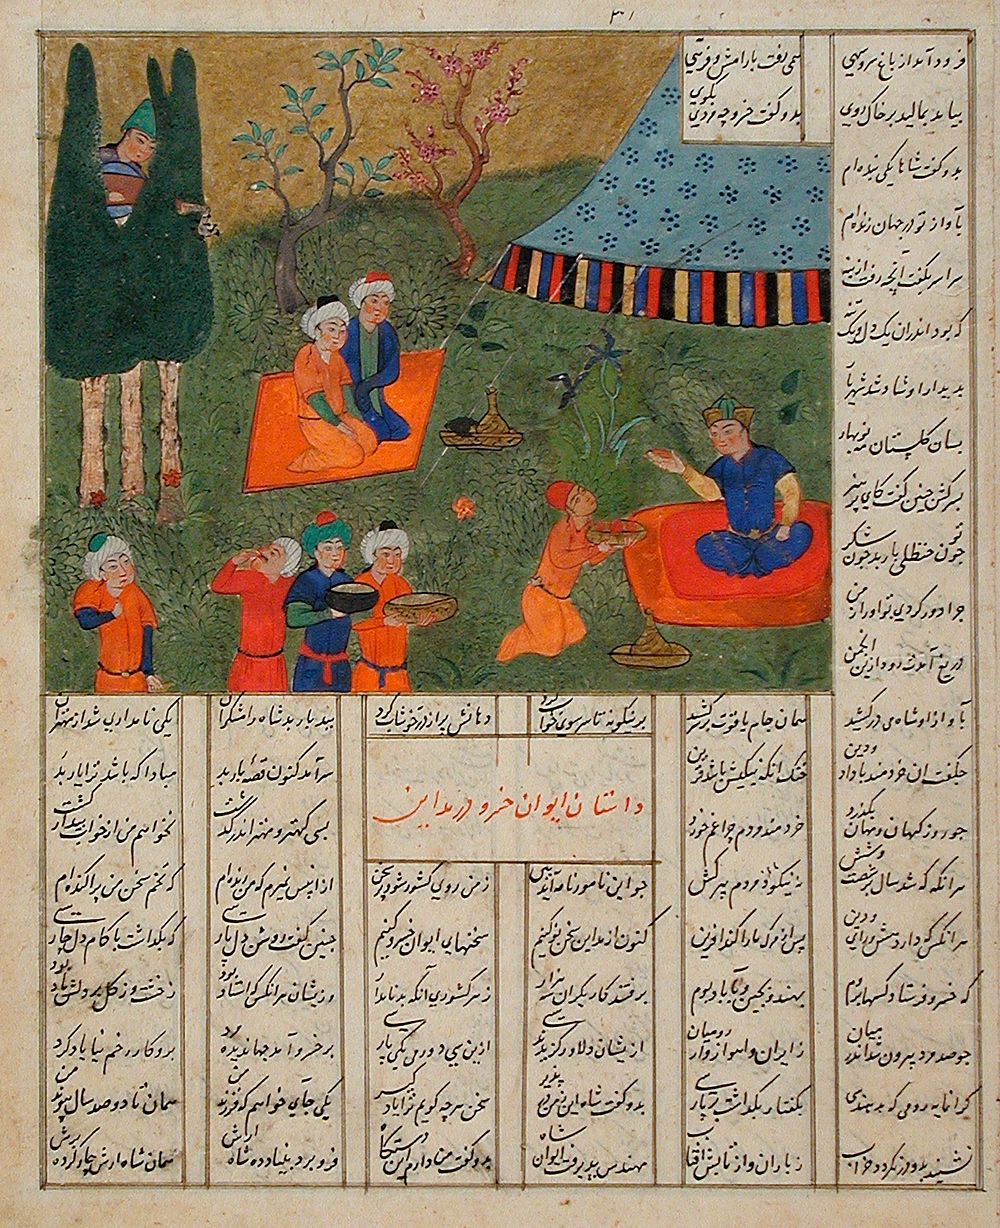 King Khusraw and the Ministrel Barbad, Folio from a Shahnama (Book of Kings)